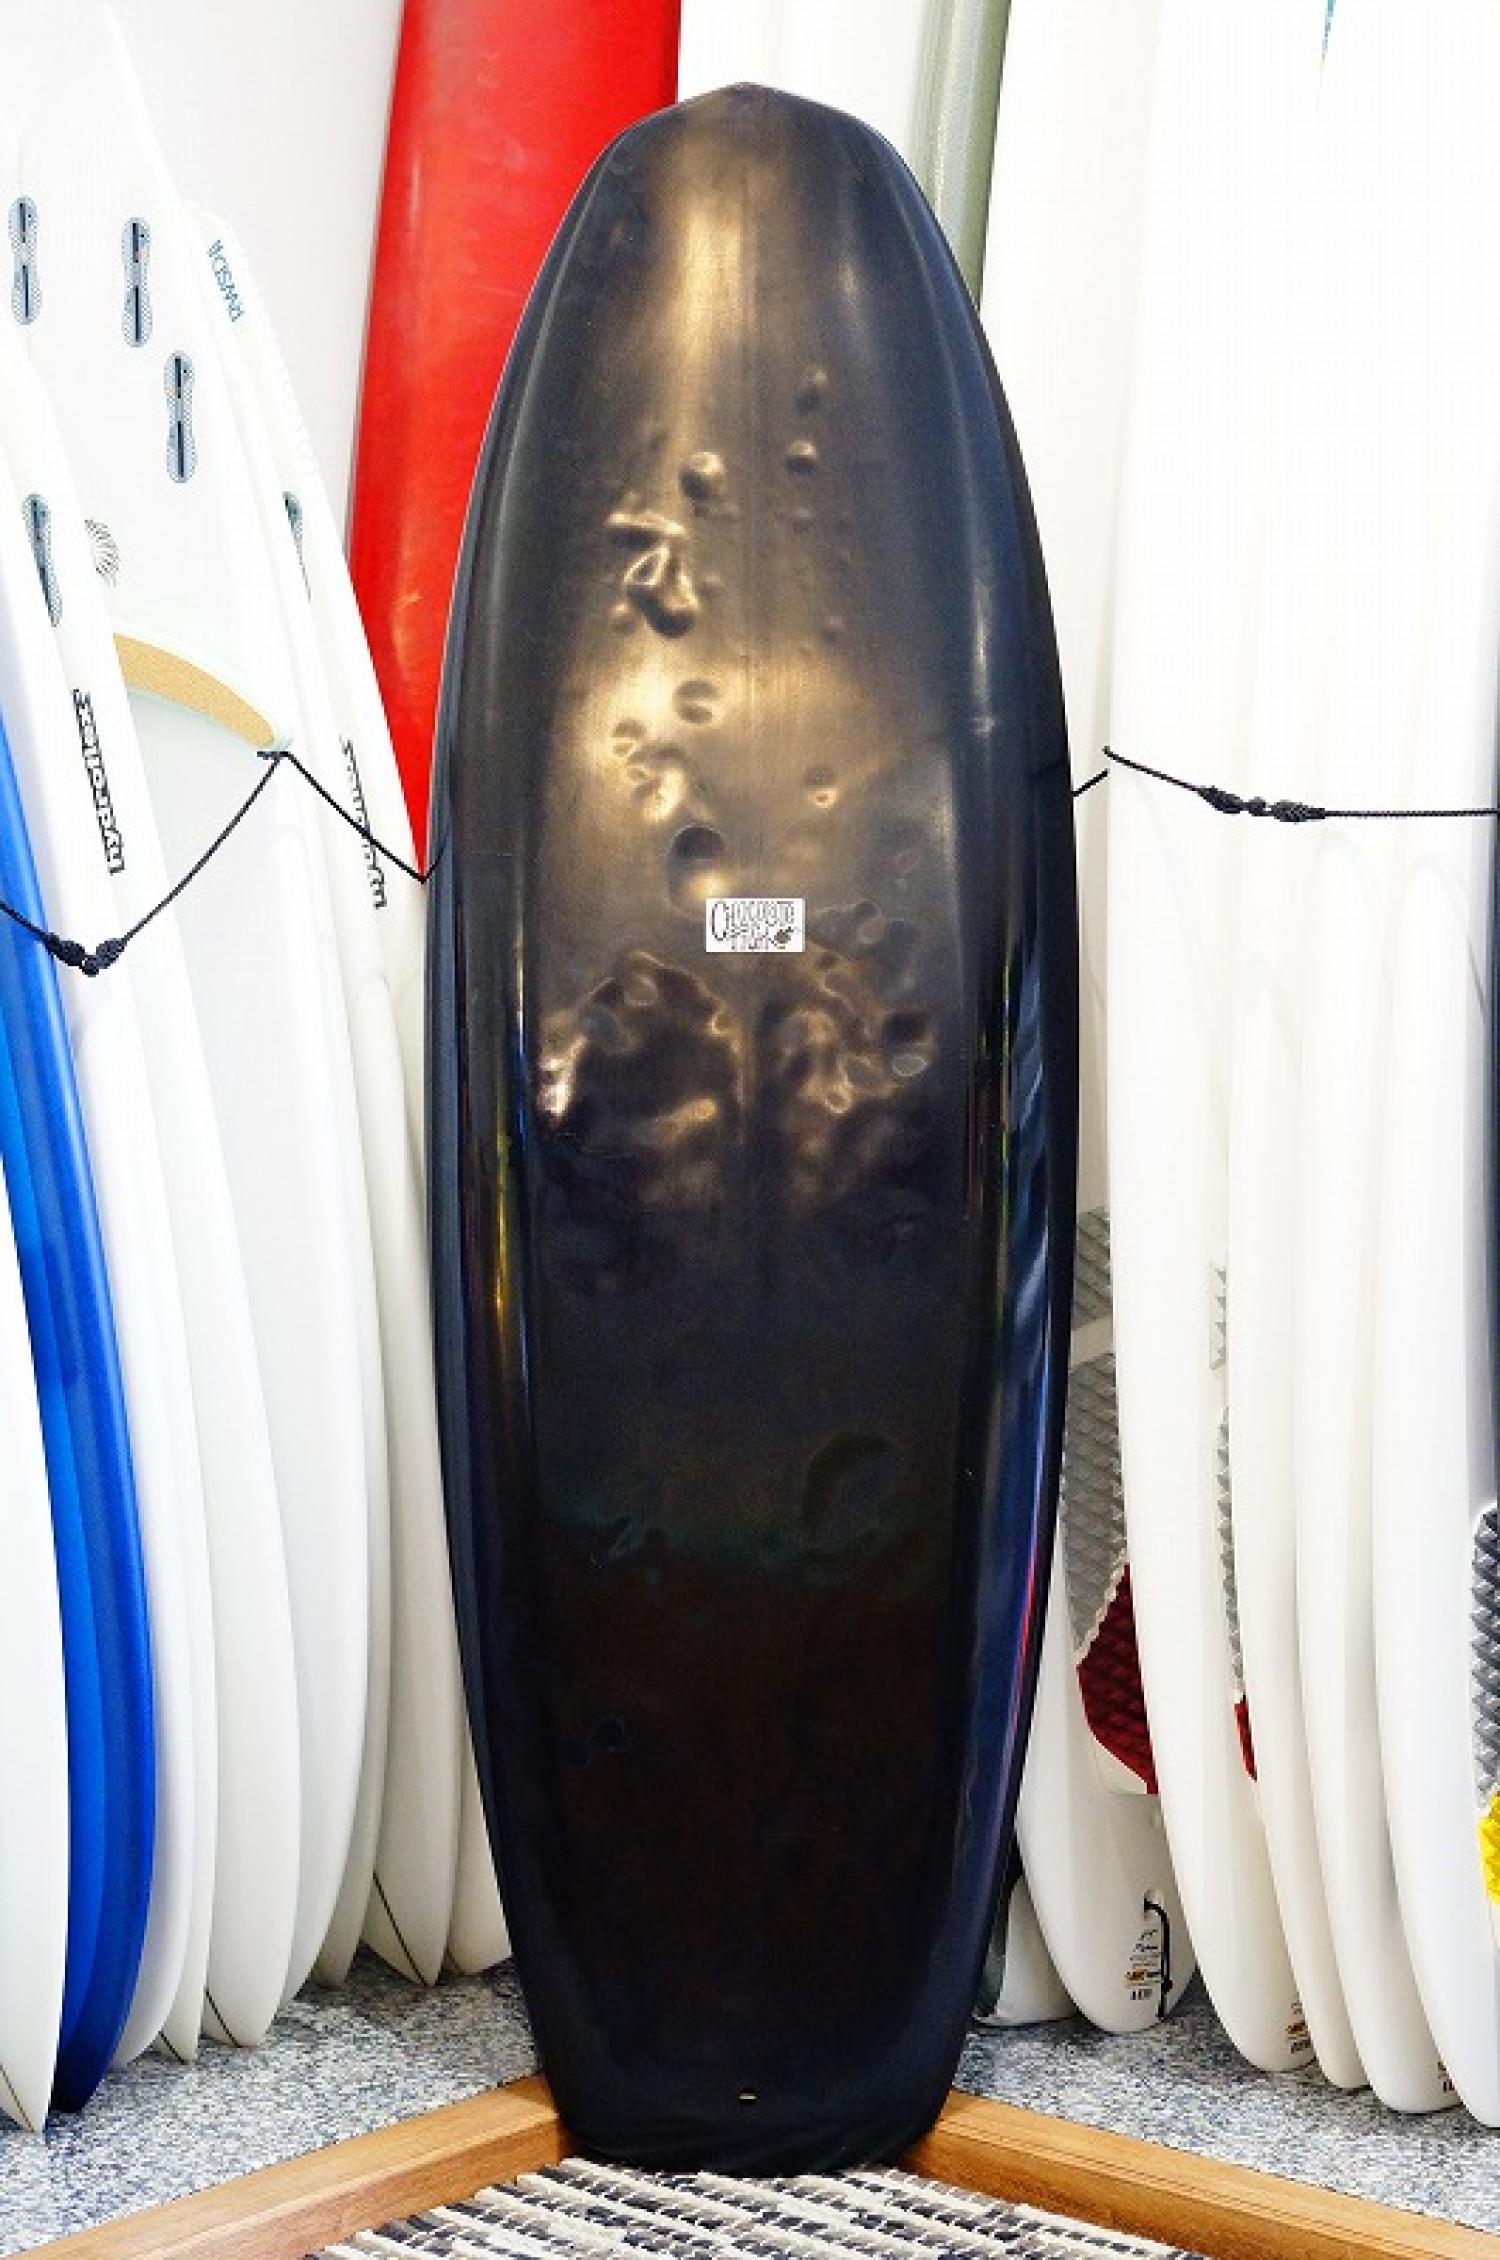 USED BOARDS （Chocolate Fish Surfboards Double Diamond 5.9)